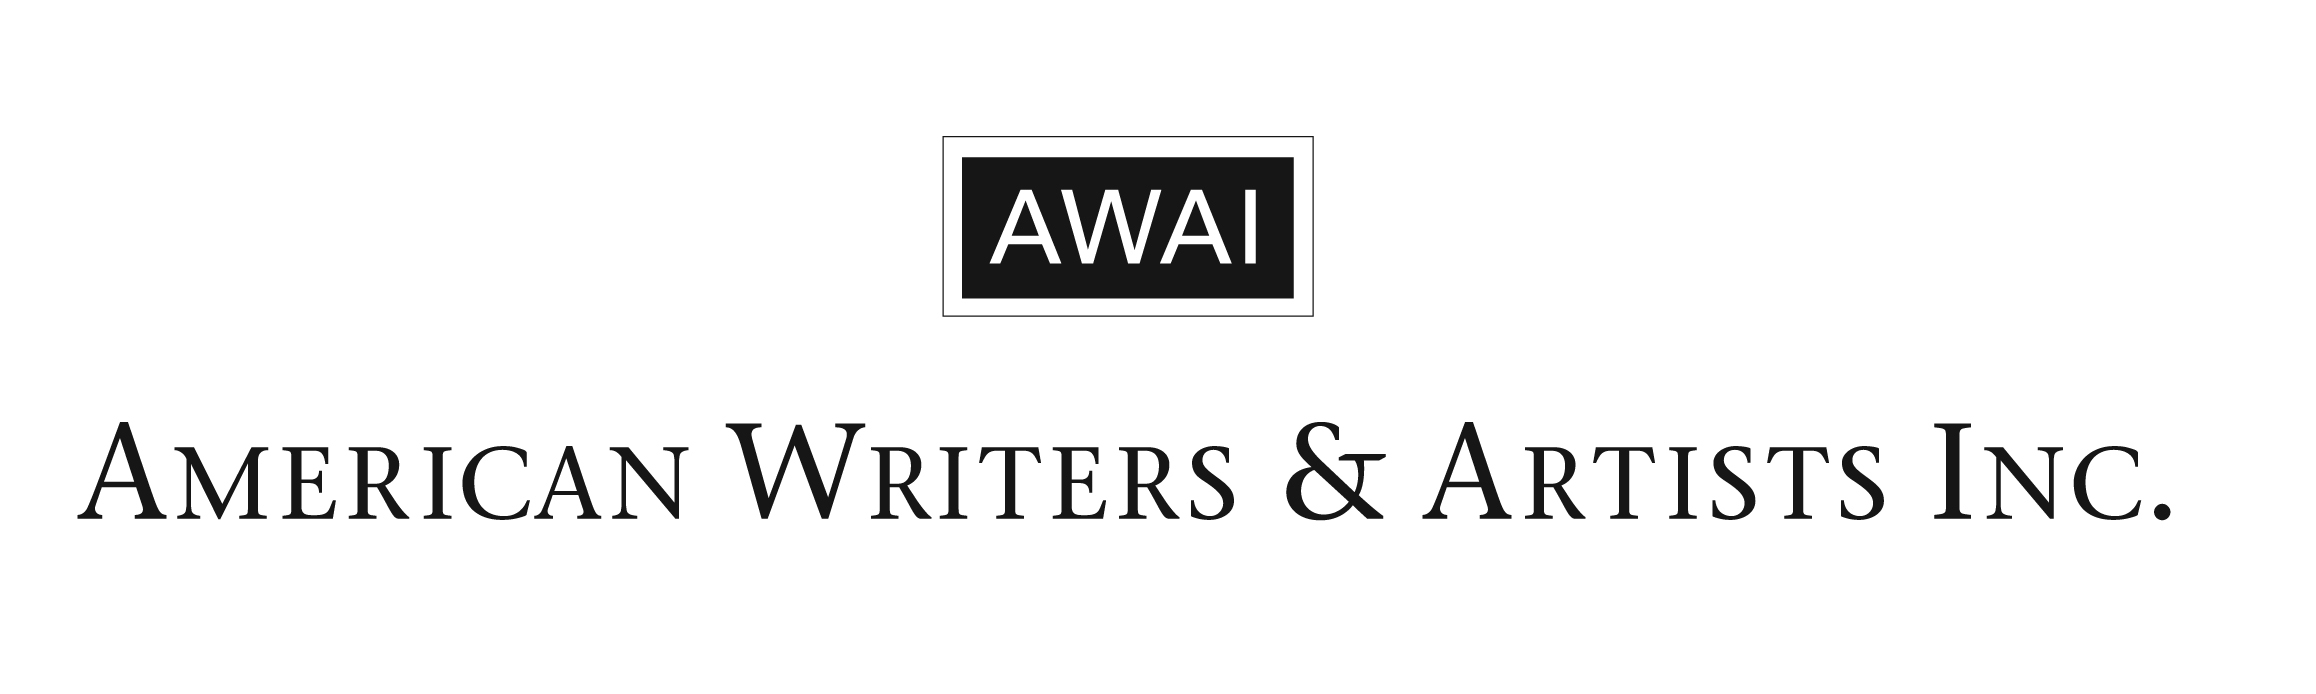 AWAI Updates and Expands Its Flagship Accelerated Program for Six ...